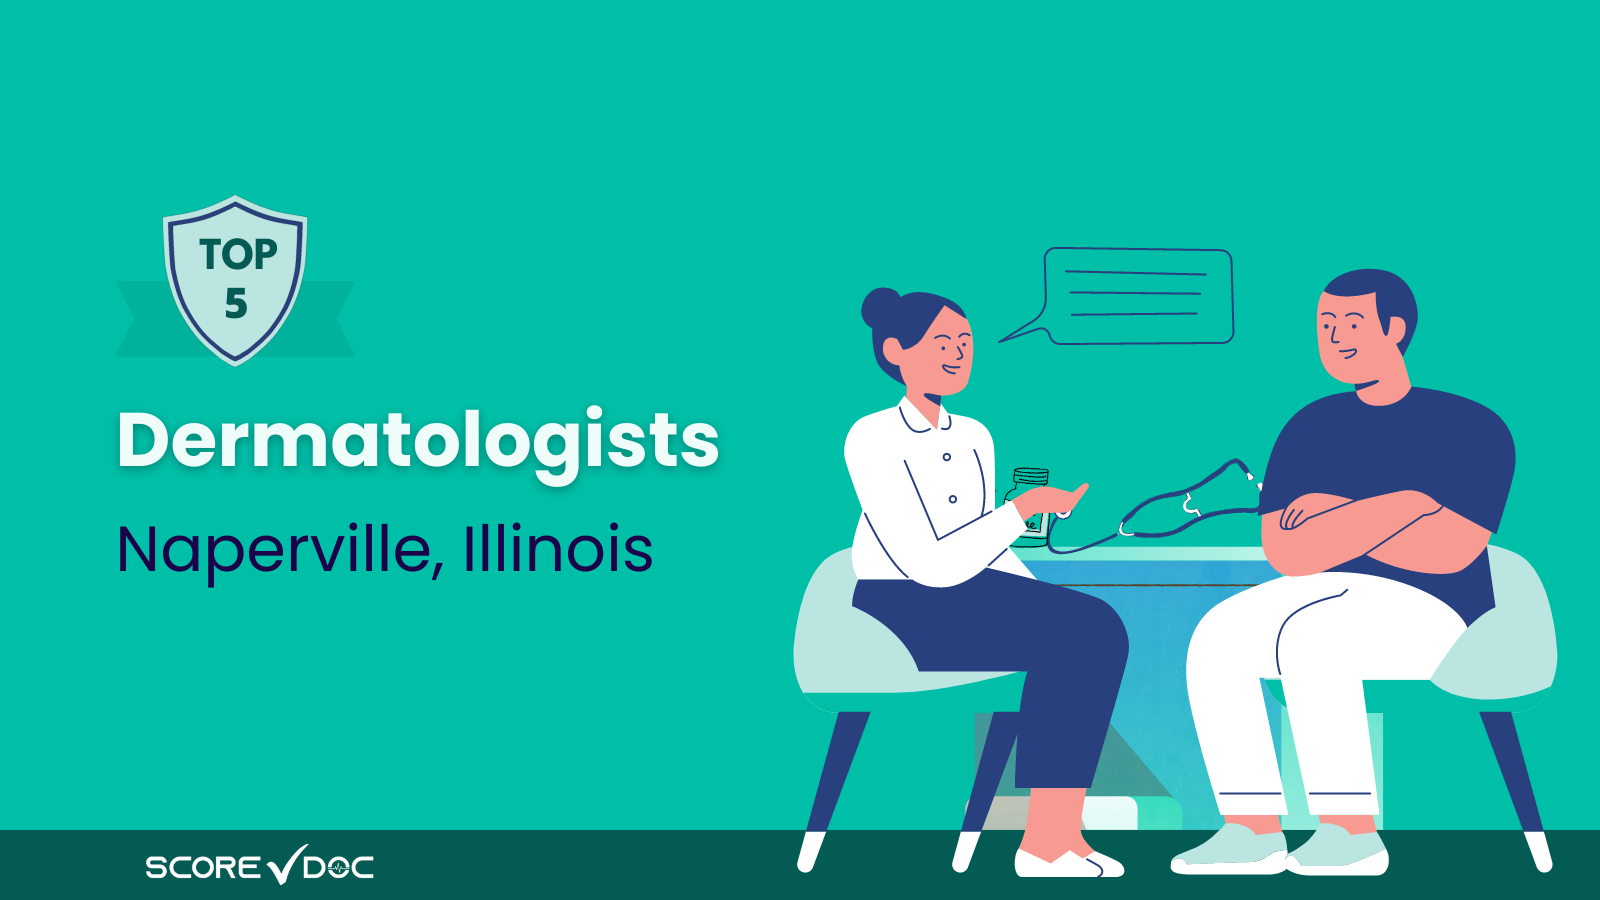 5 Highest Rated Dermatologists in Naperville, Illinois